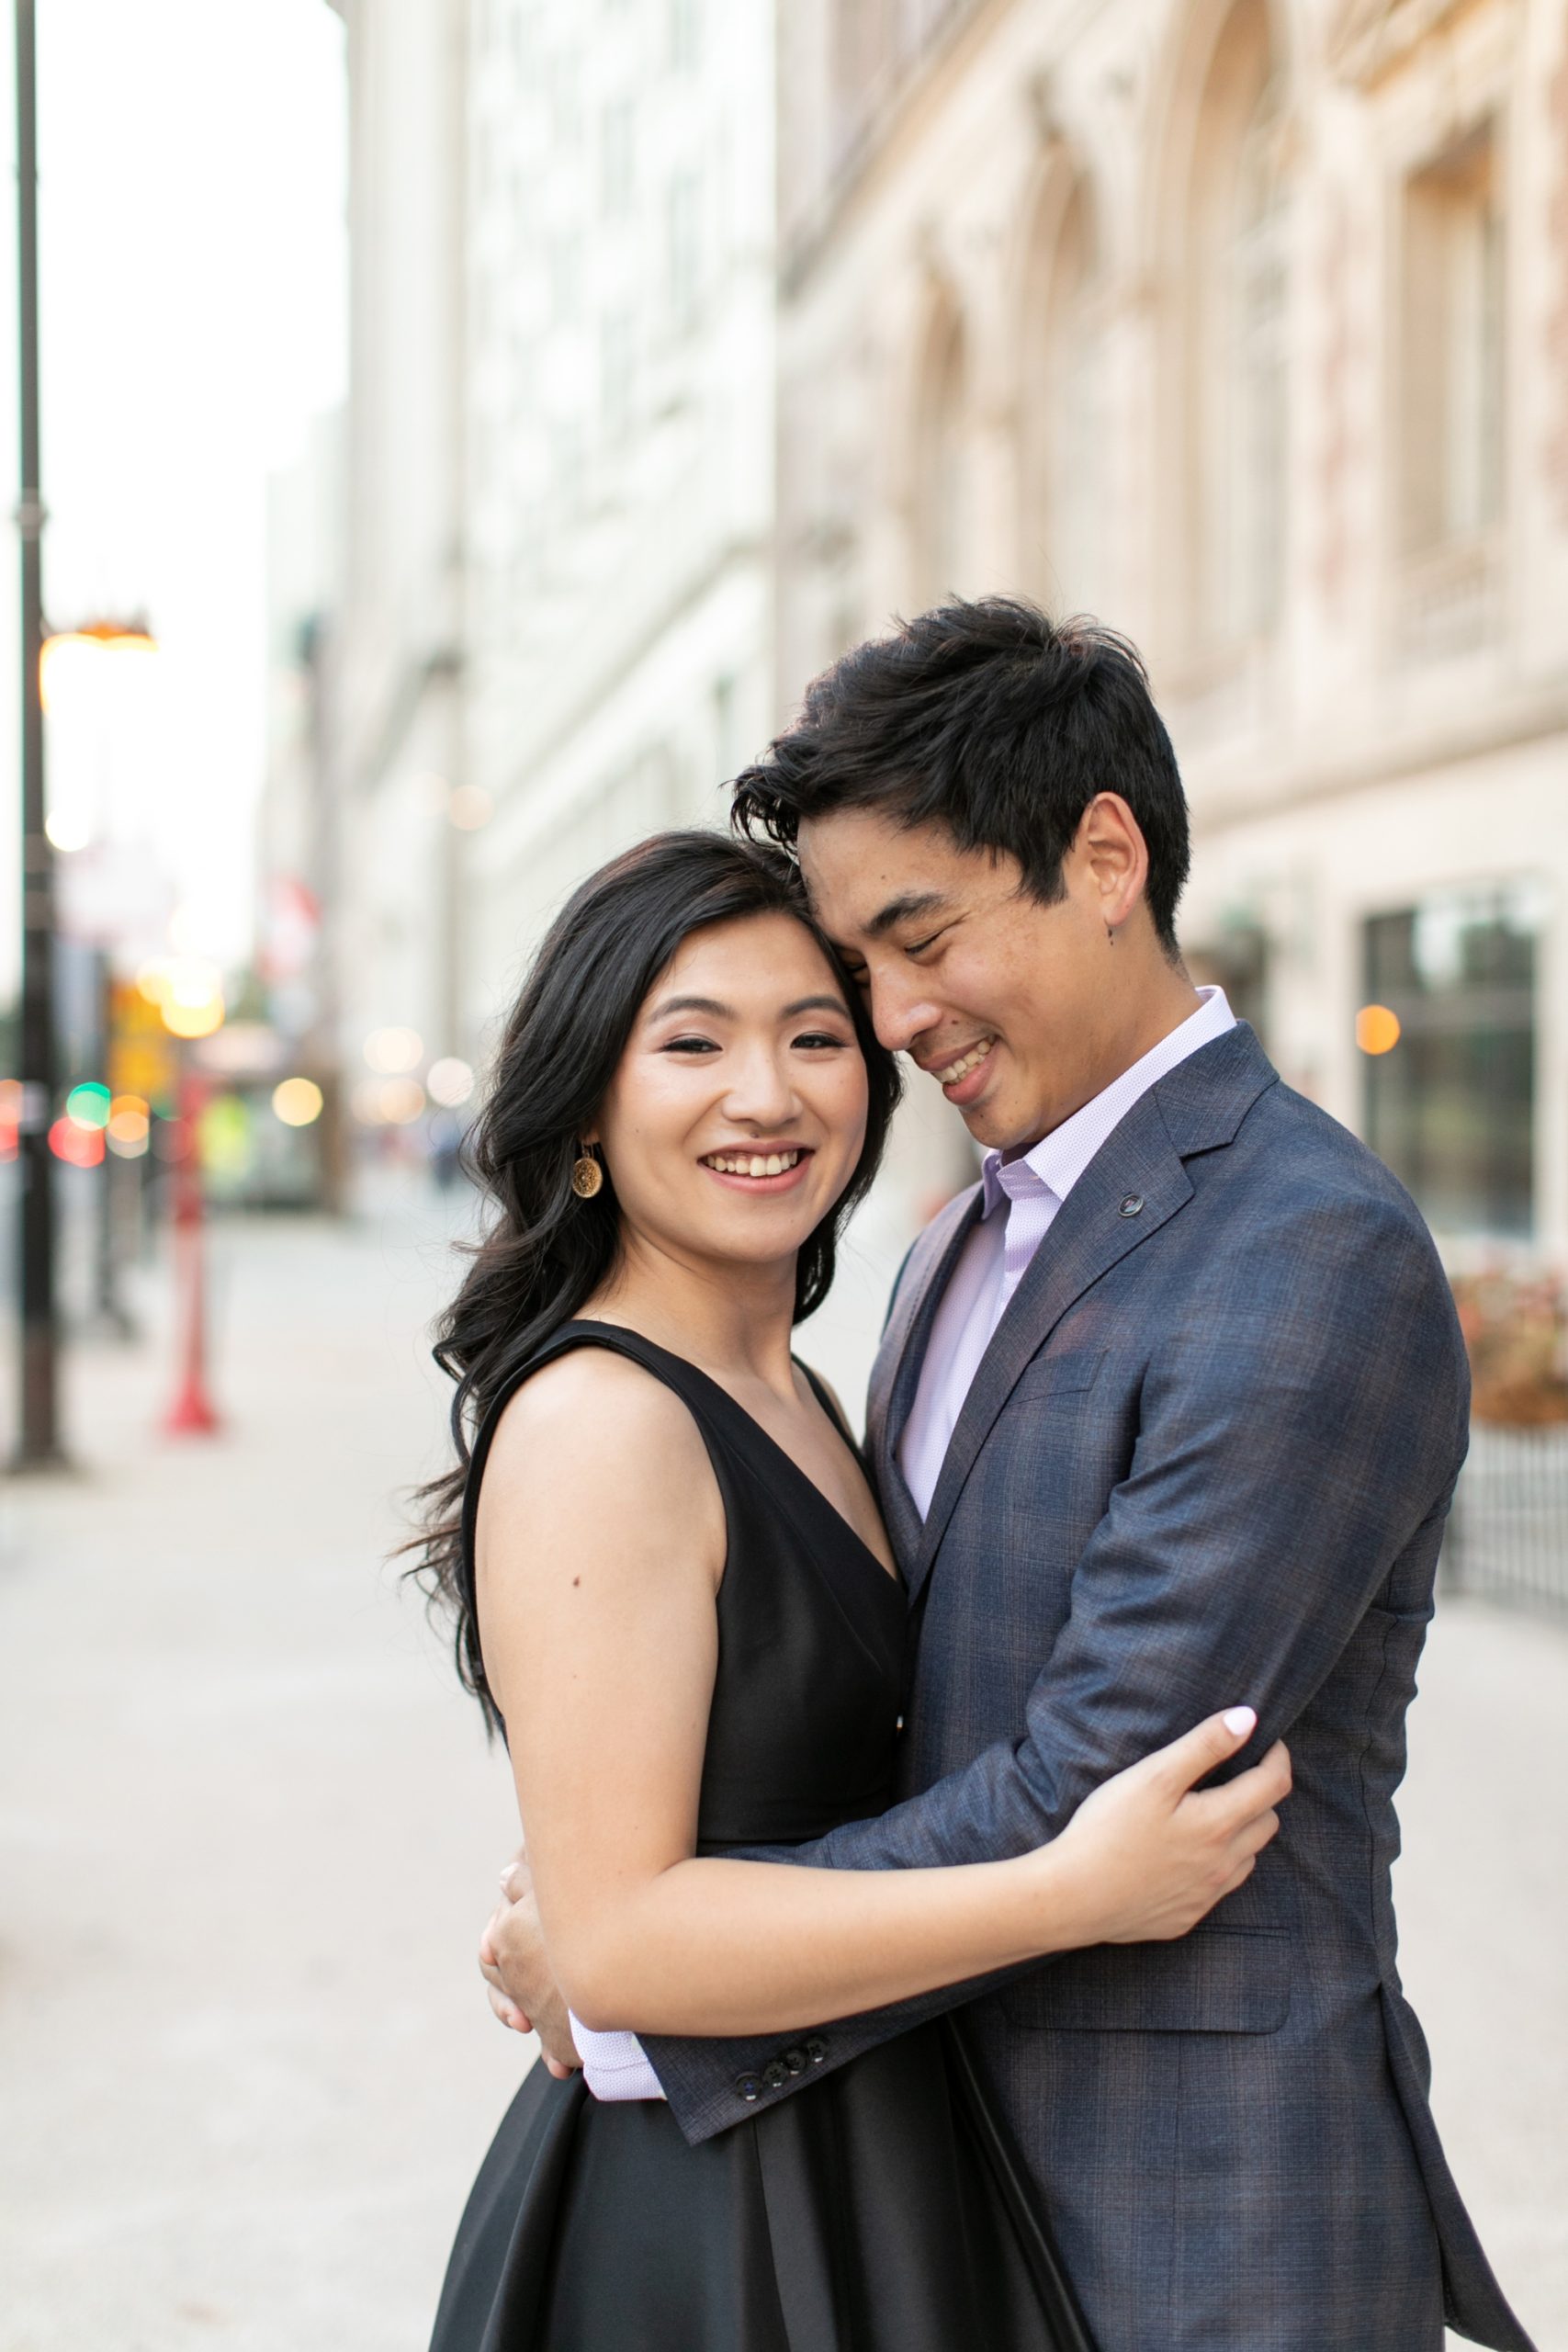 The couple hugged and smiled during their summer engagement photo session in downtown Chicago